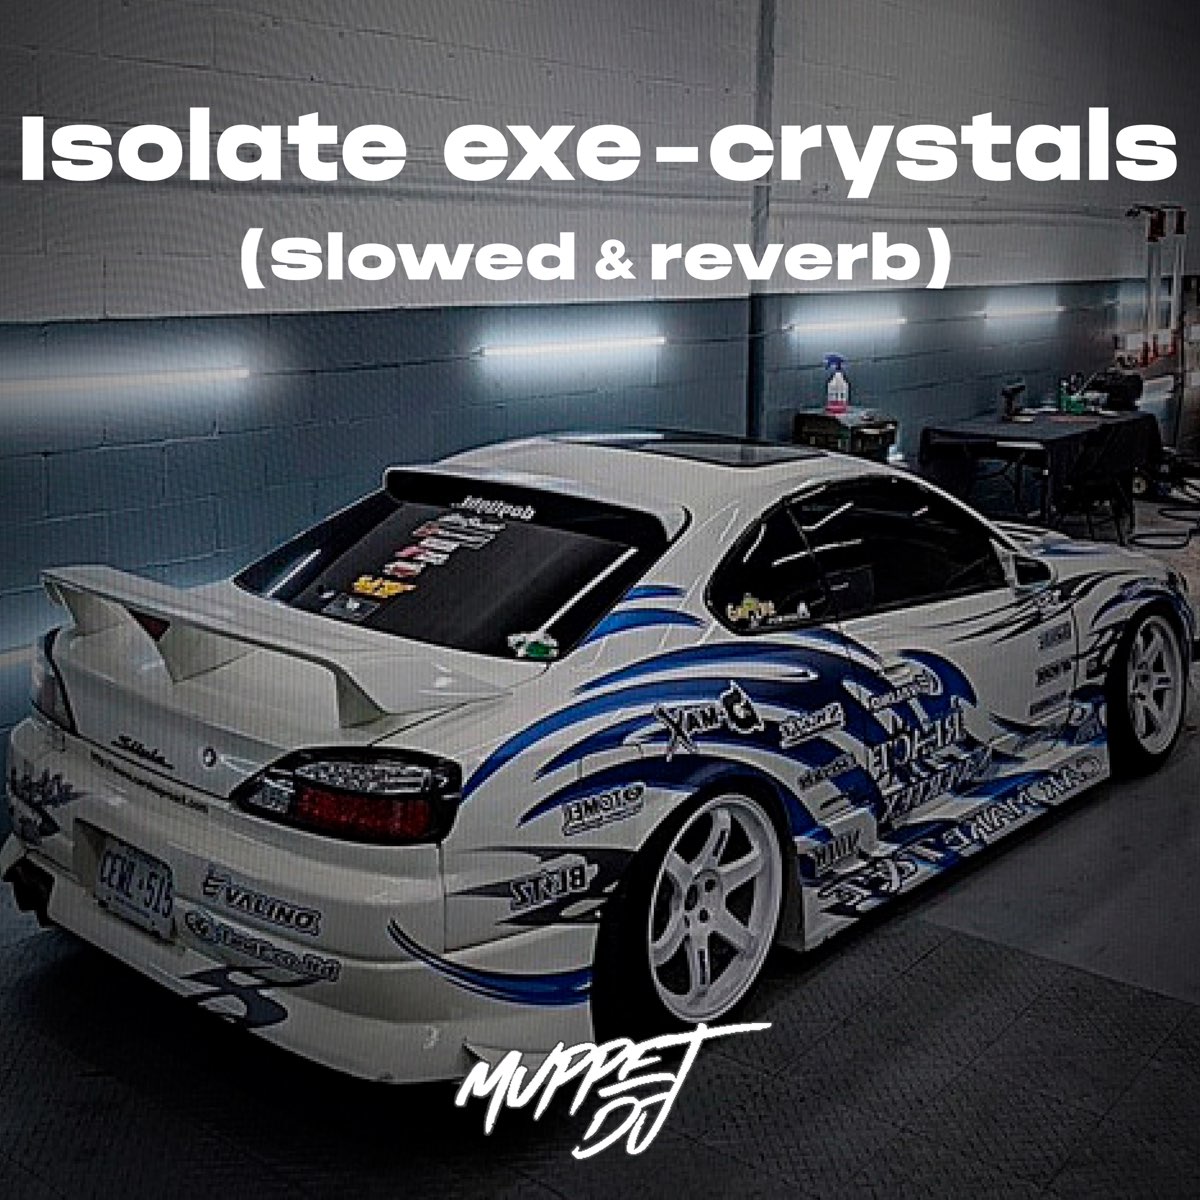 Crystals isolate slowed reverb. Crystals isolate.exe. Isolate exe. Isolate.exe - Crystals (Slowed € Reverb). Crystal exe.